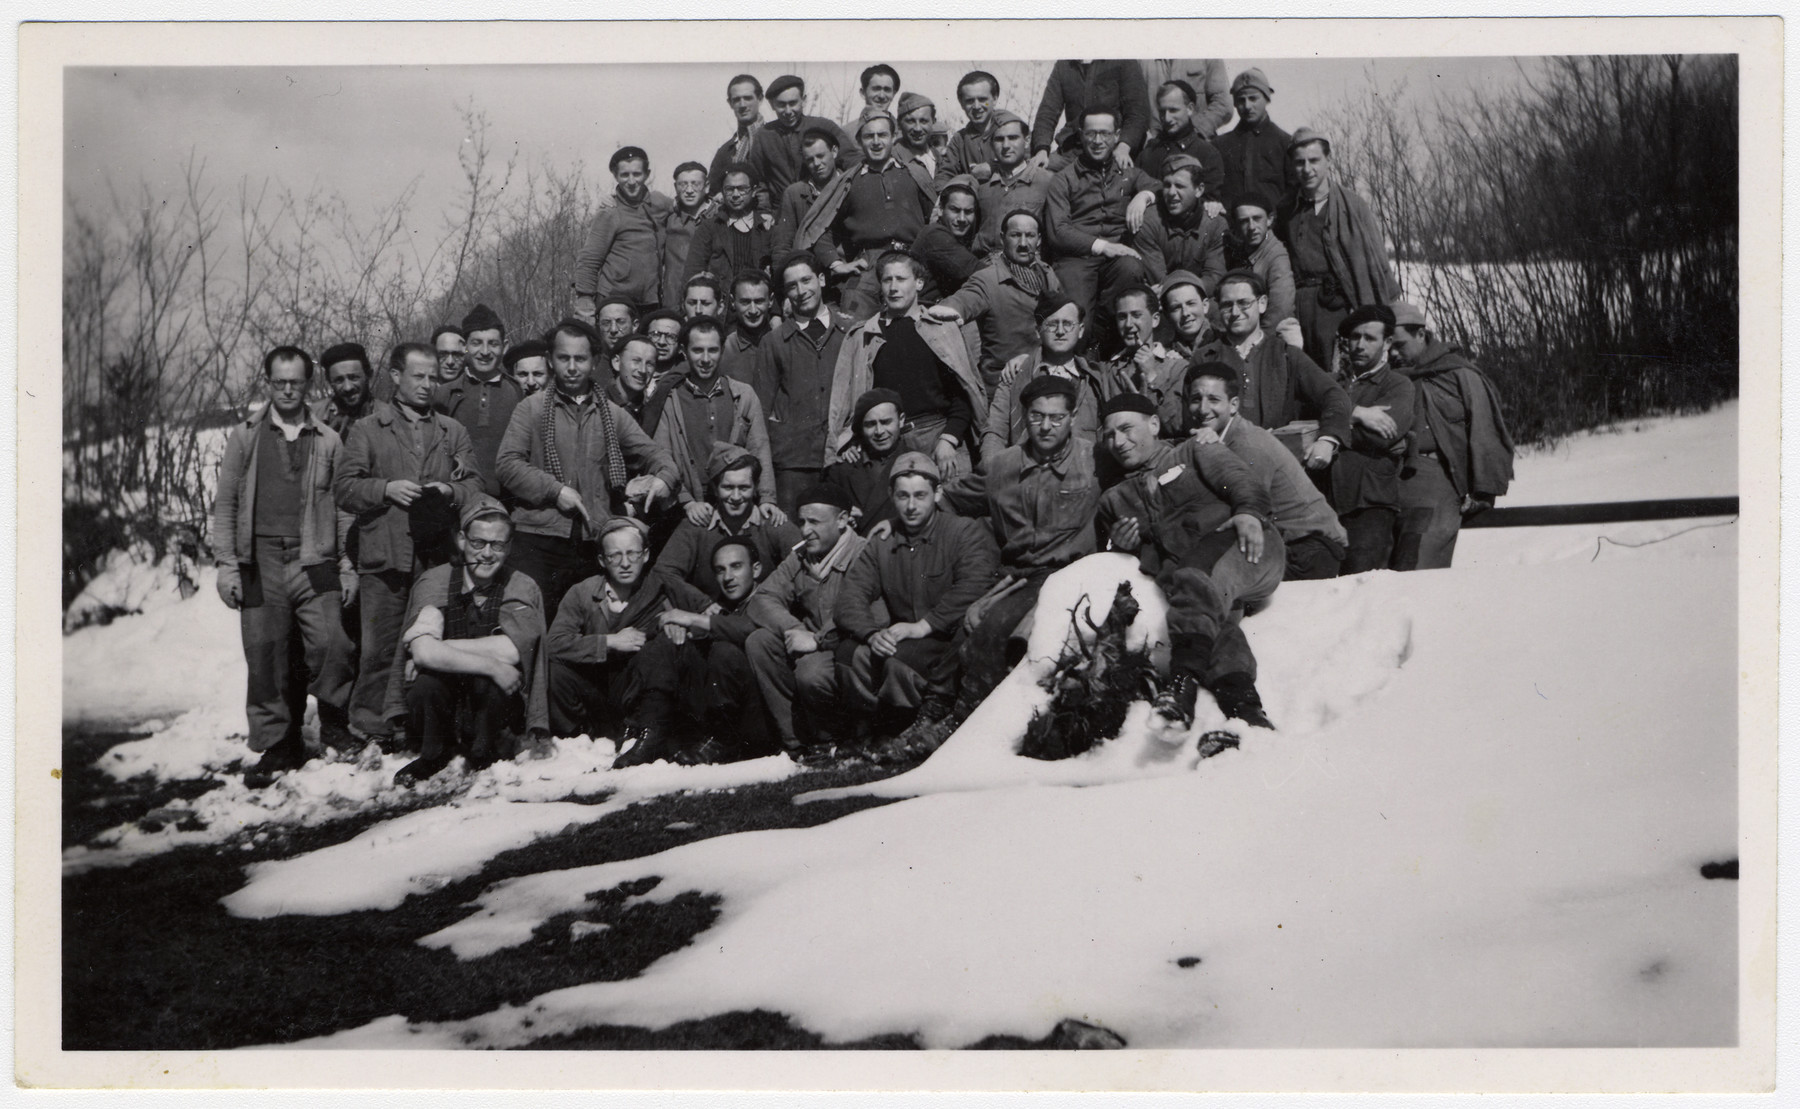 Group portrait of Jewish internees posing in the snow in an unidentified Swiss labor camp.

Max Schattner is pictured in the first standing row, second from the left.